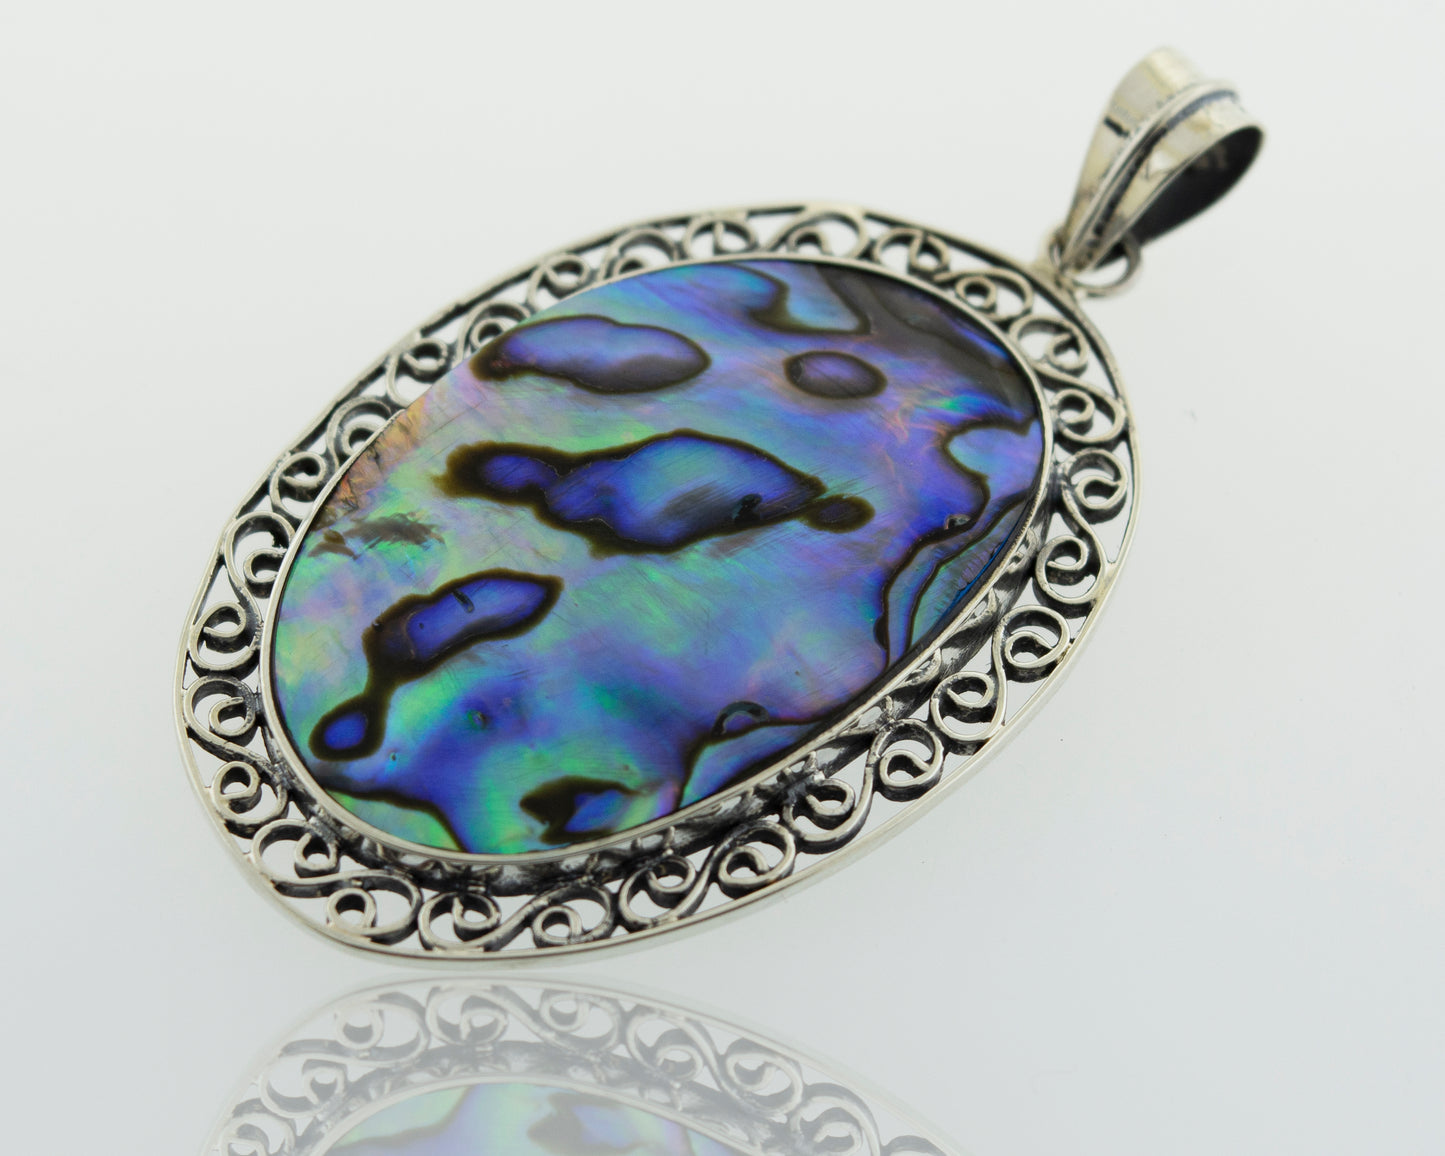 A stunning Oval Abalone Pendant with filigree border in a Super Silver setting.